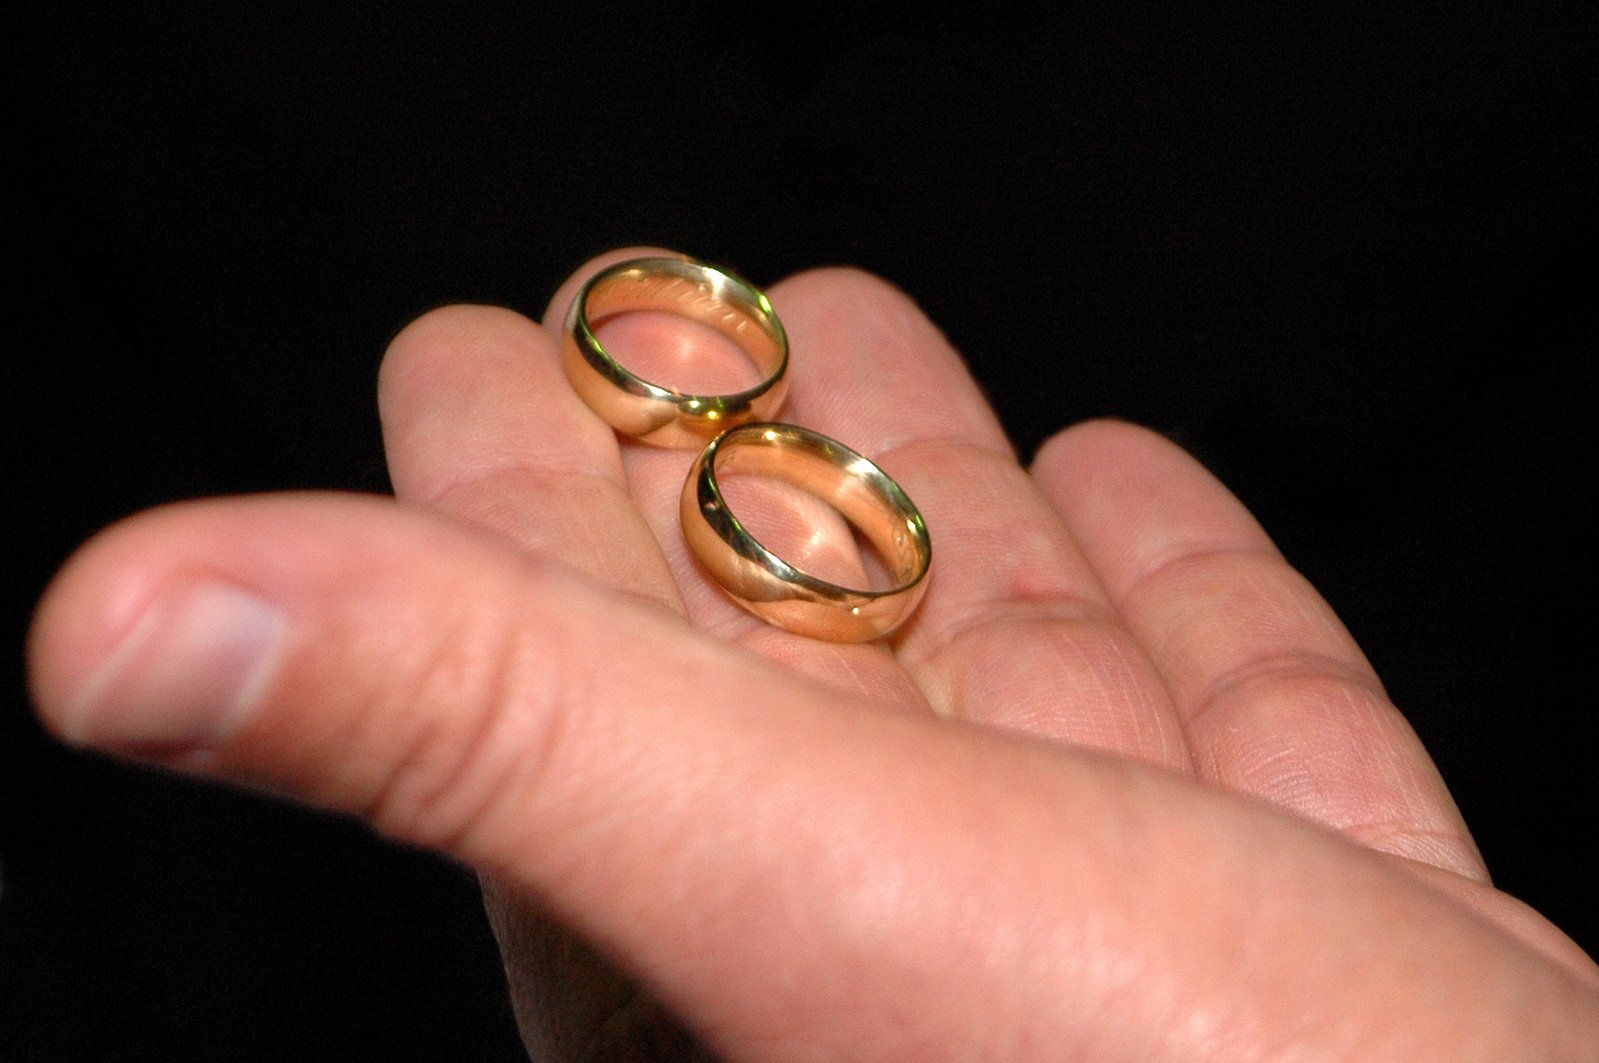 there are two gold wedding rings in the palm